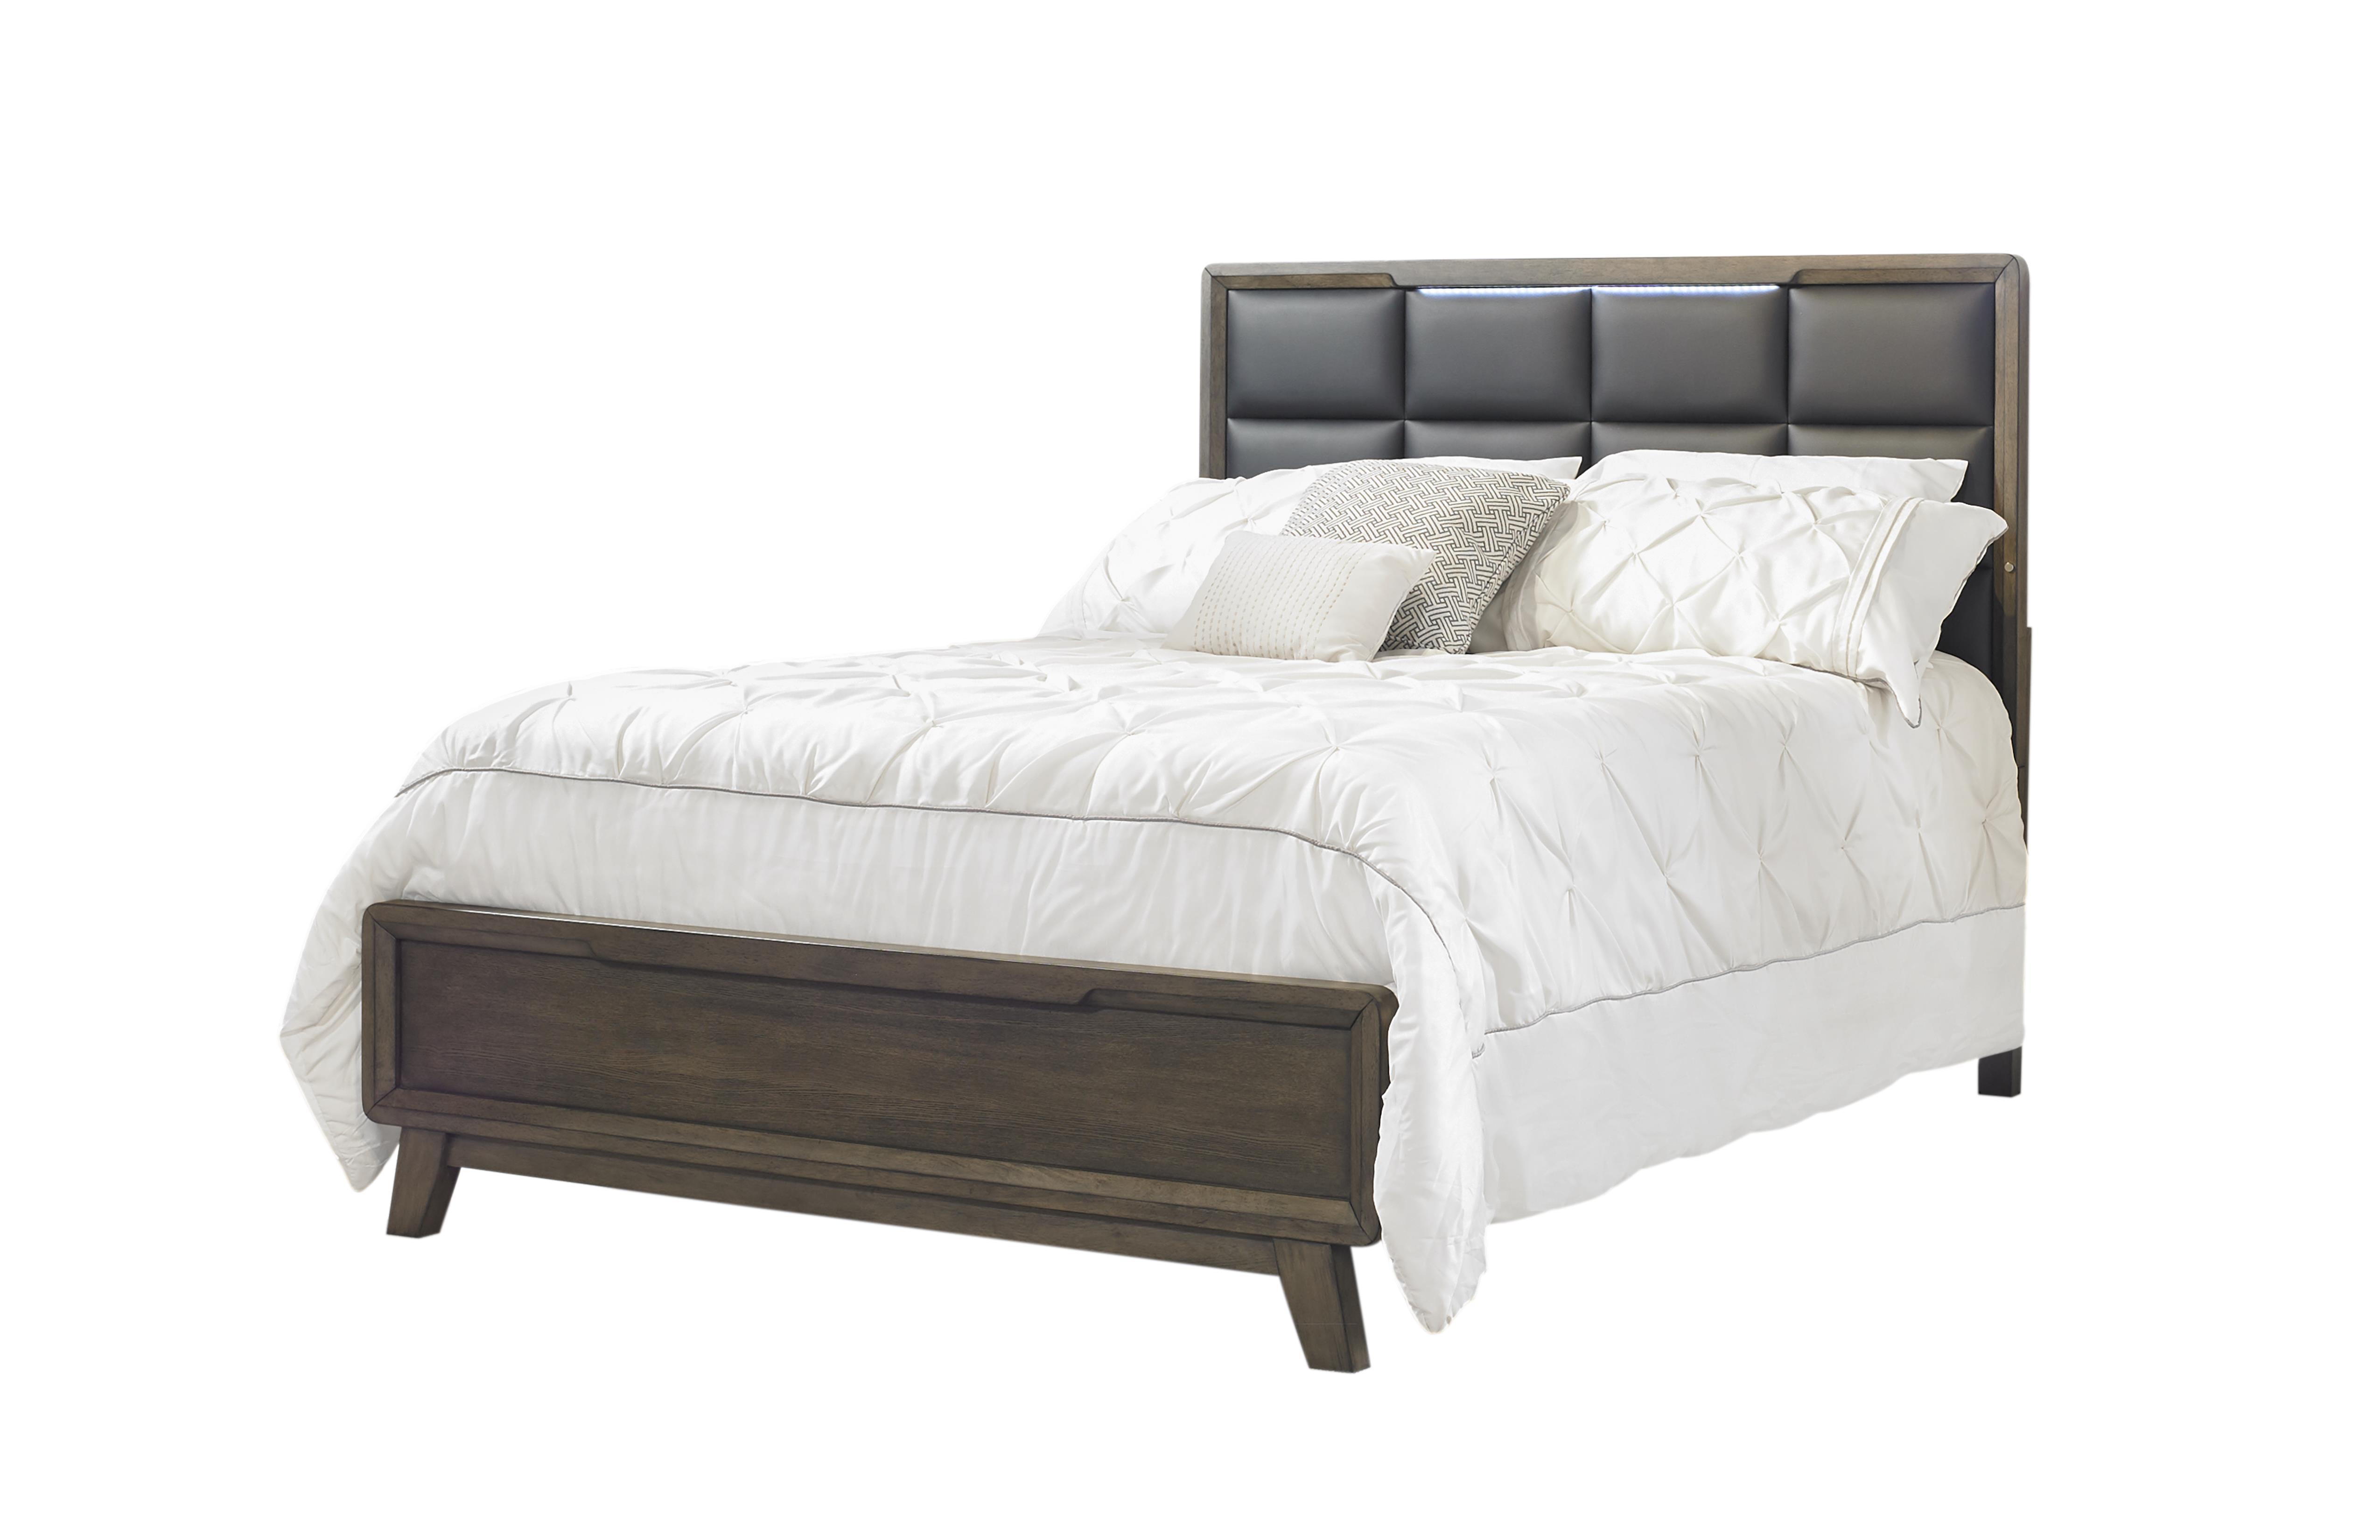 Contemporary, Modern Panel Bedroom Set VALENCIA 213-110-Set-3 213-110-2N-3PC in Coffee, Brown Faux Leather